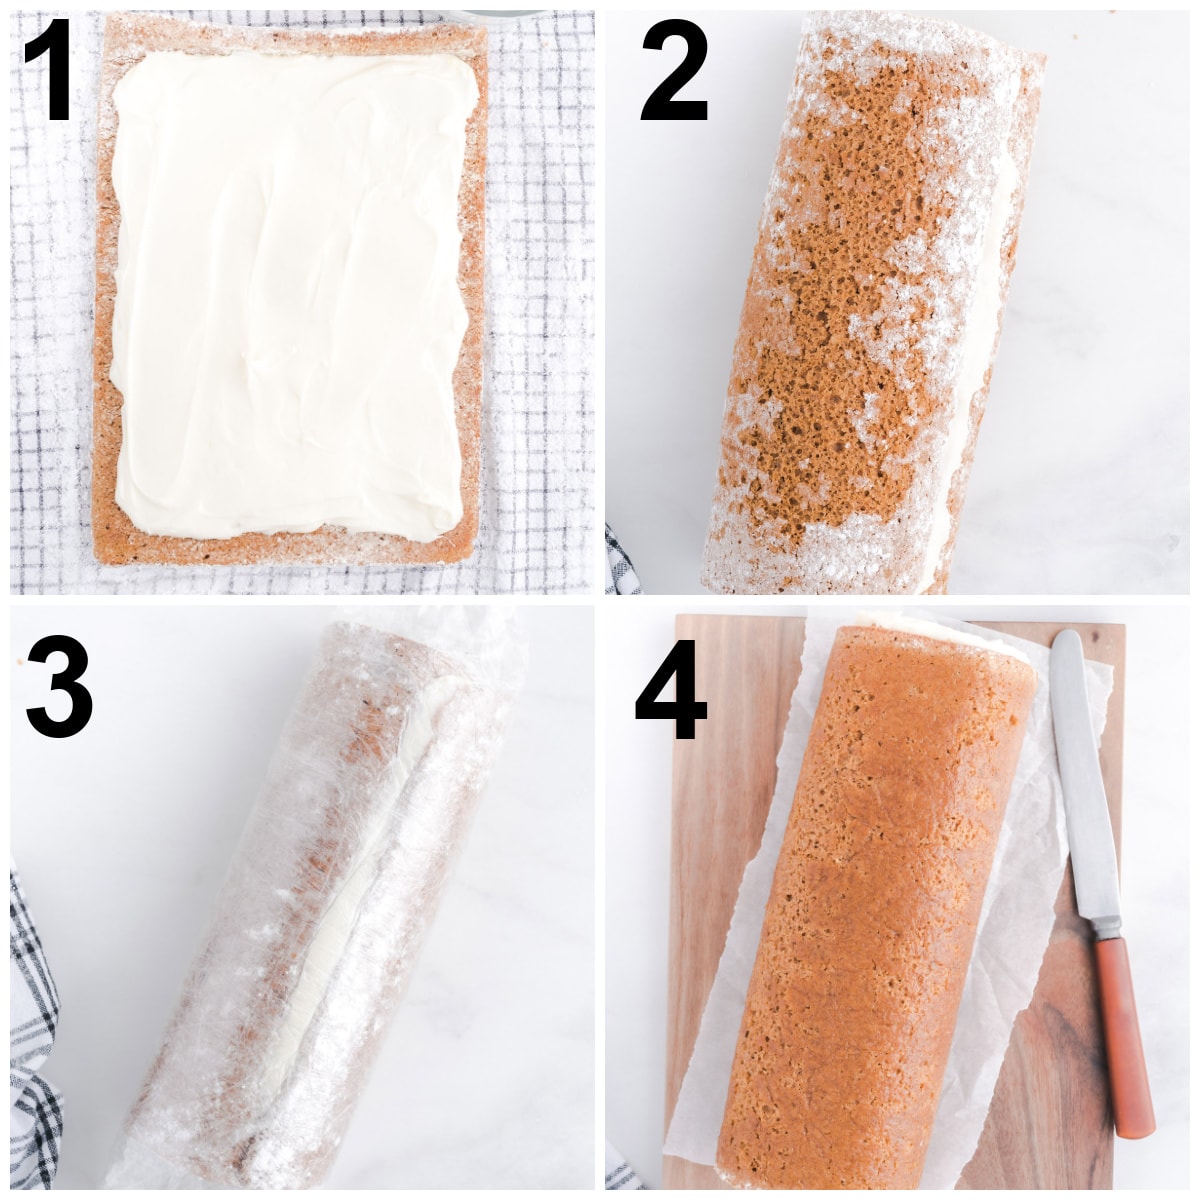 process of spreading the cream cheese filling and rolling the cake